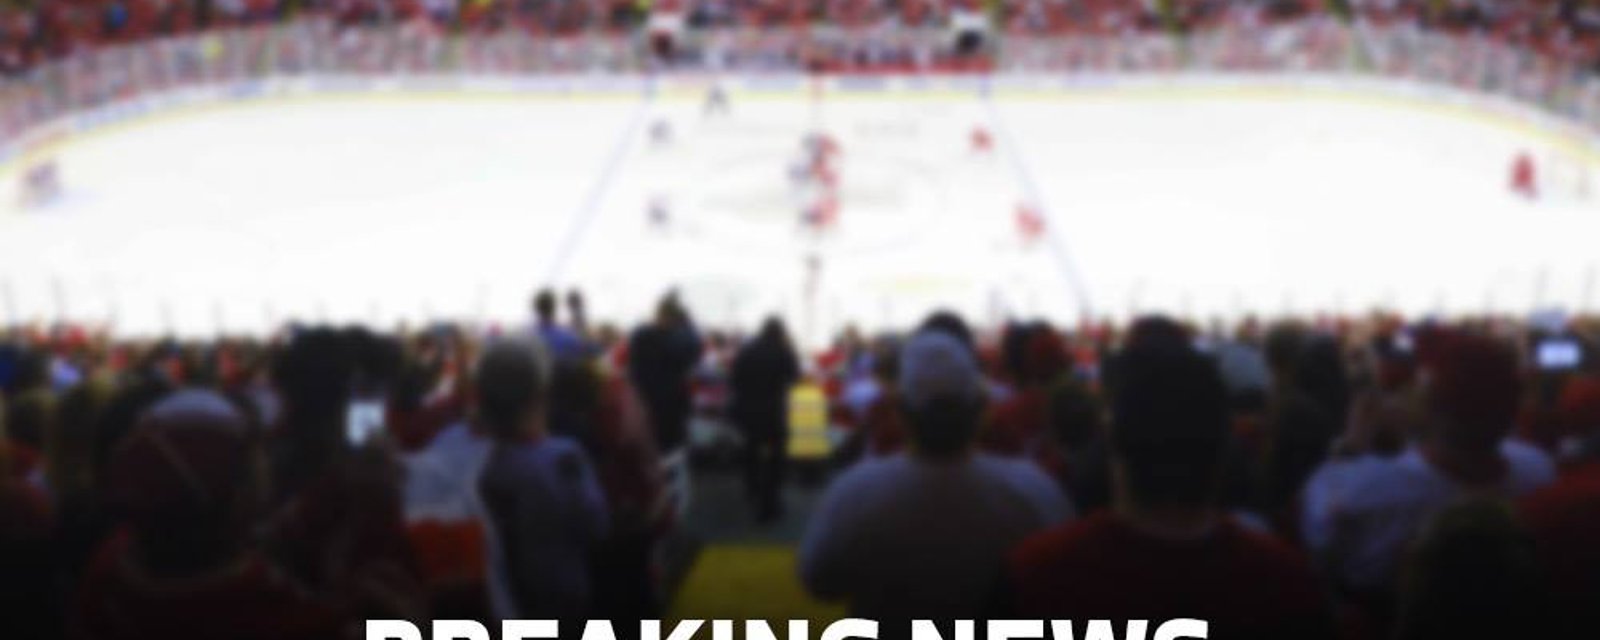 BREAKING: Powerful defenseman announces he leaves the NHL to play in the KHL.